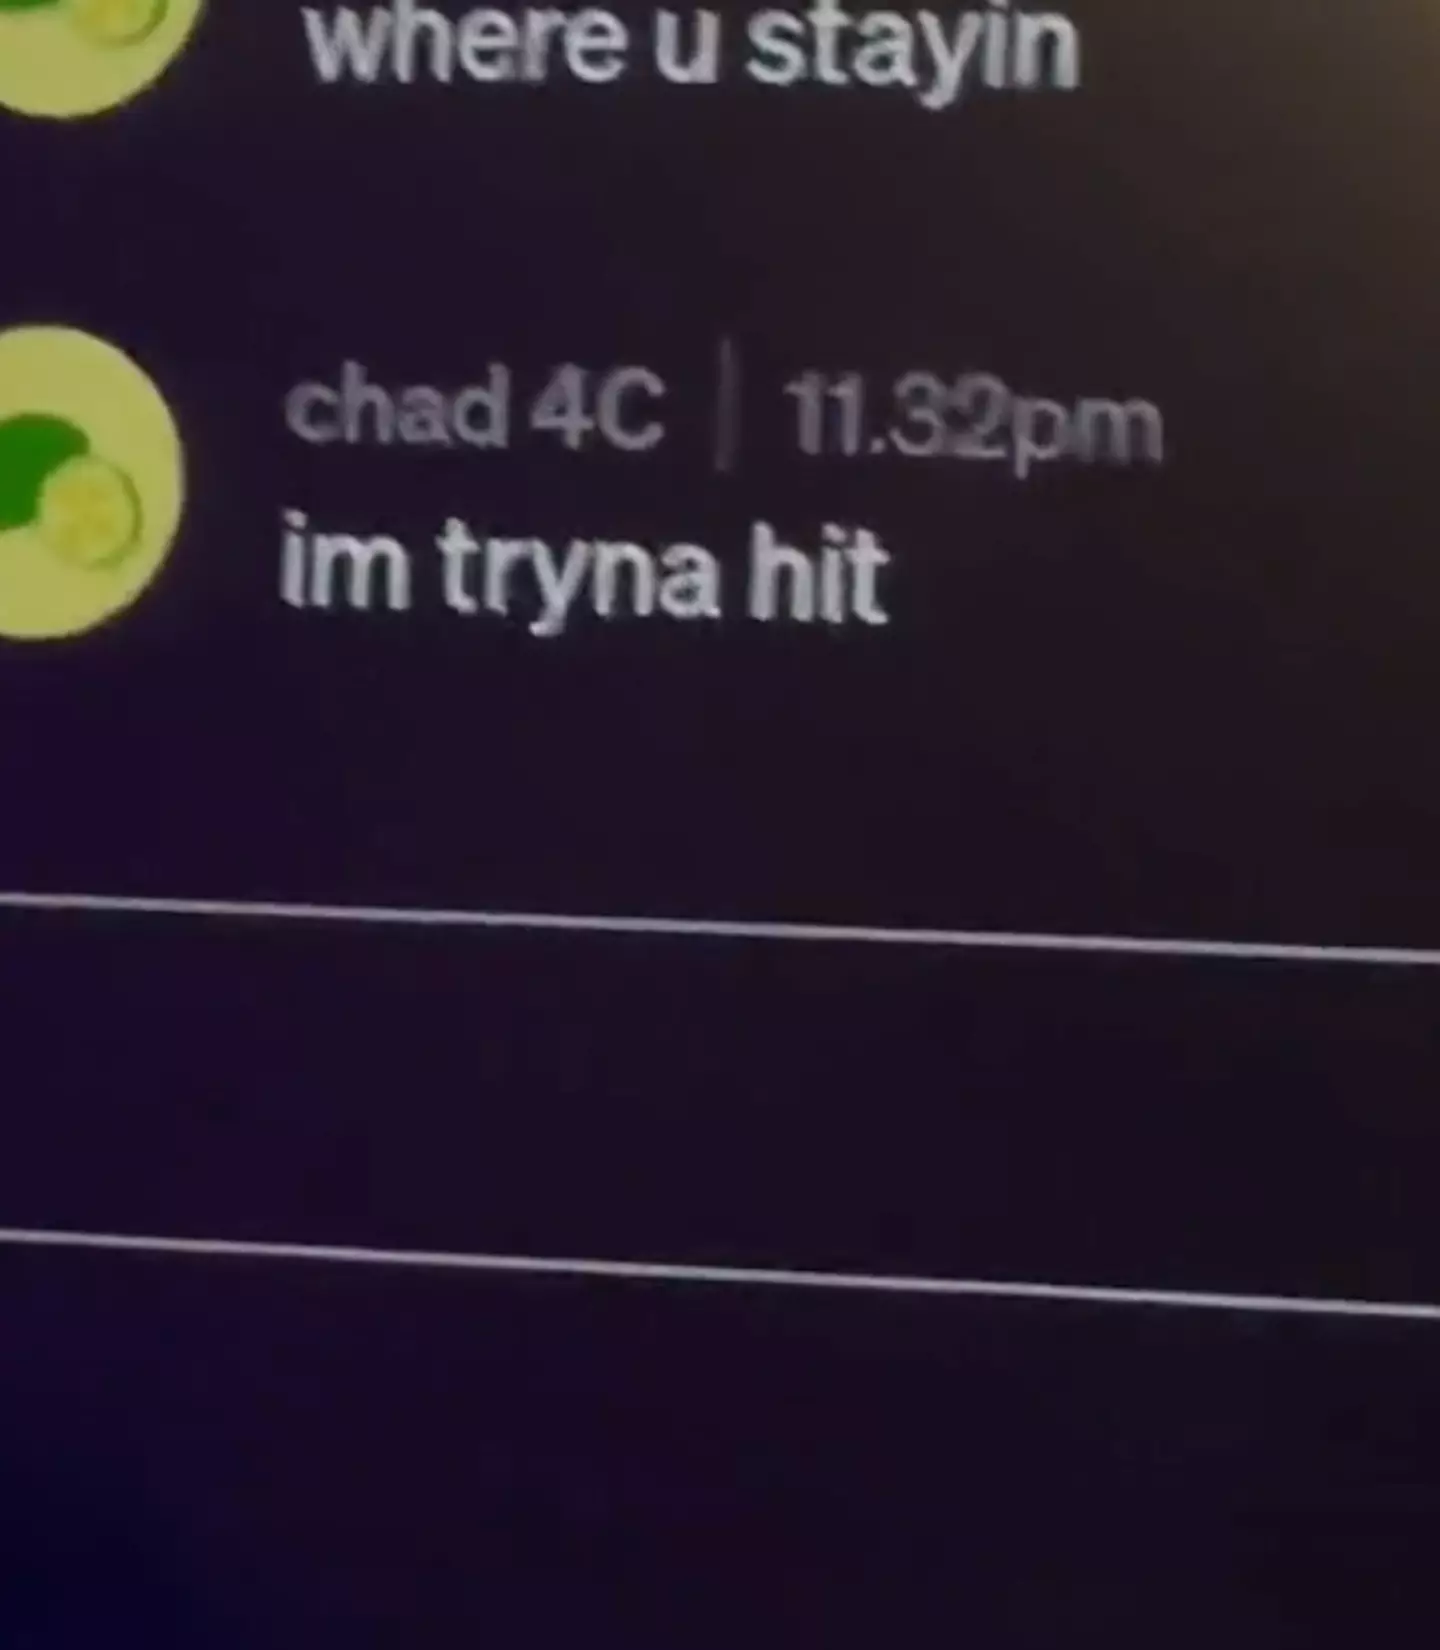 Calm down Chad in 4C.